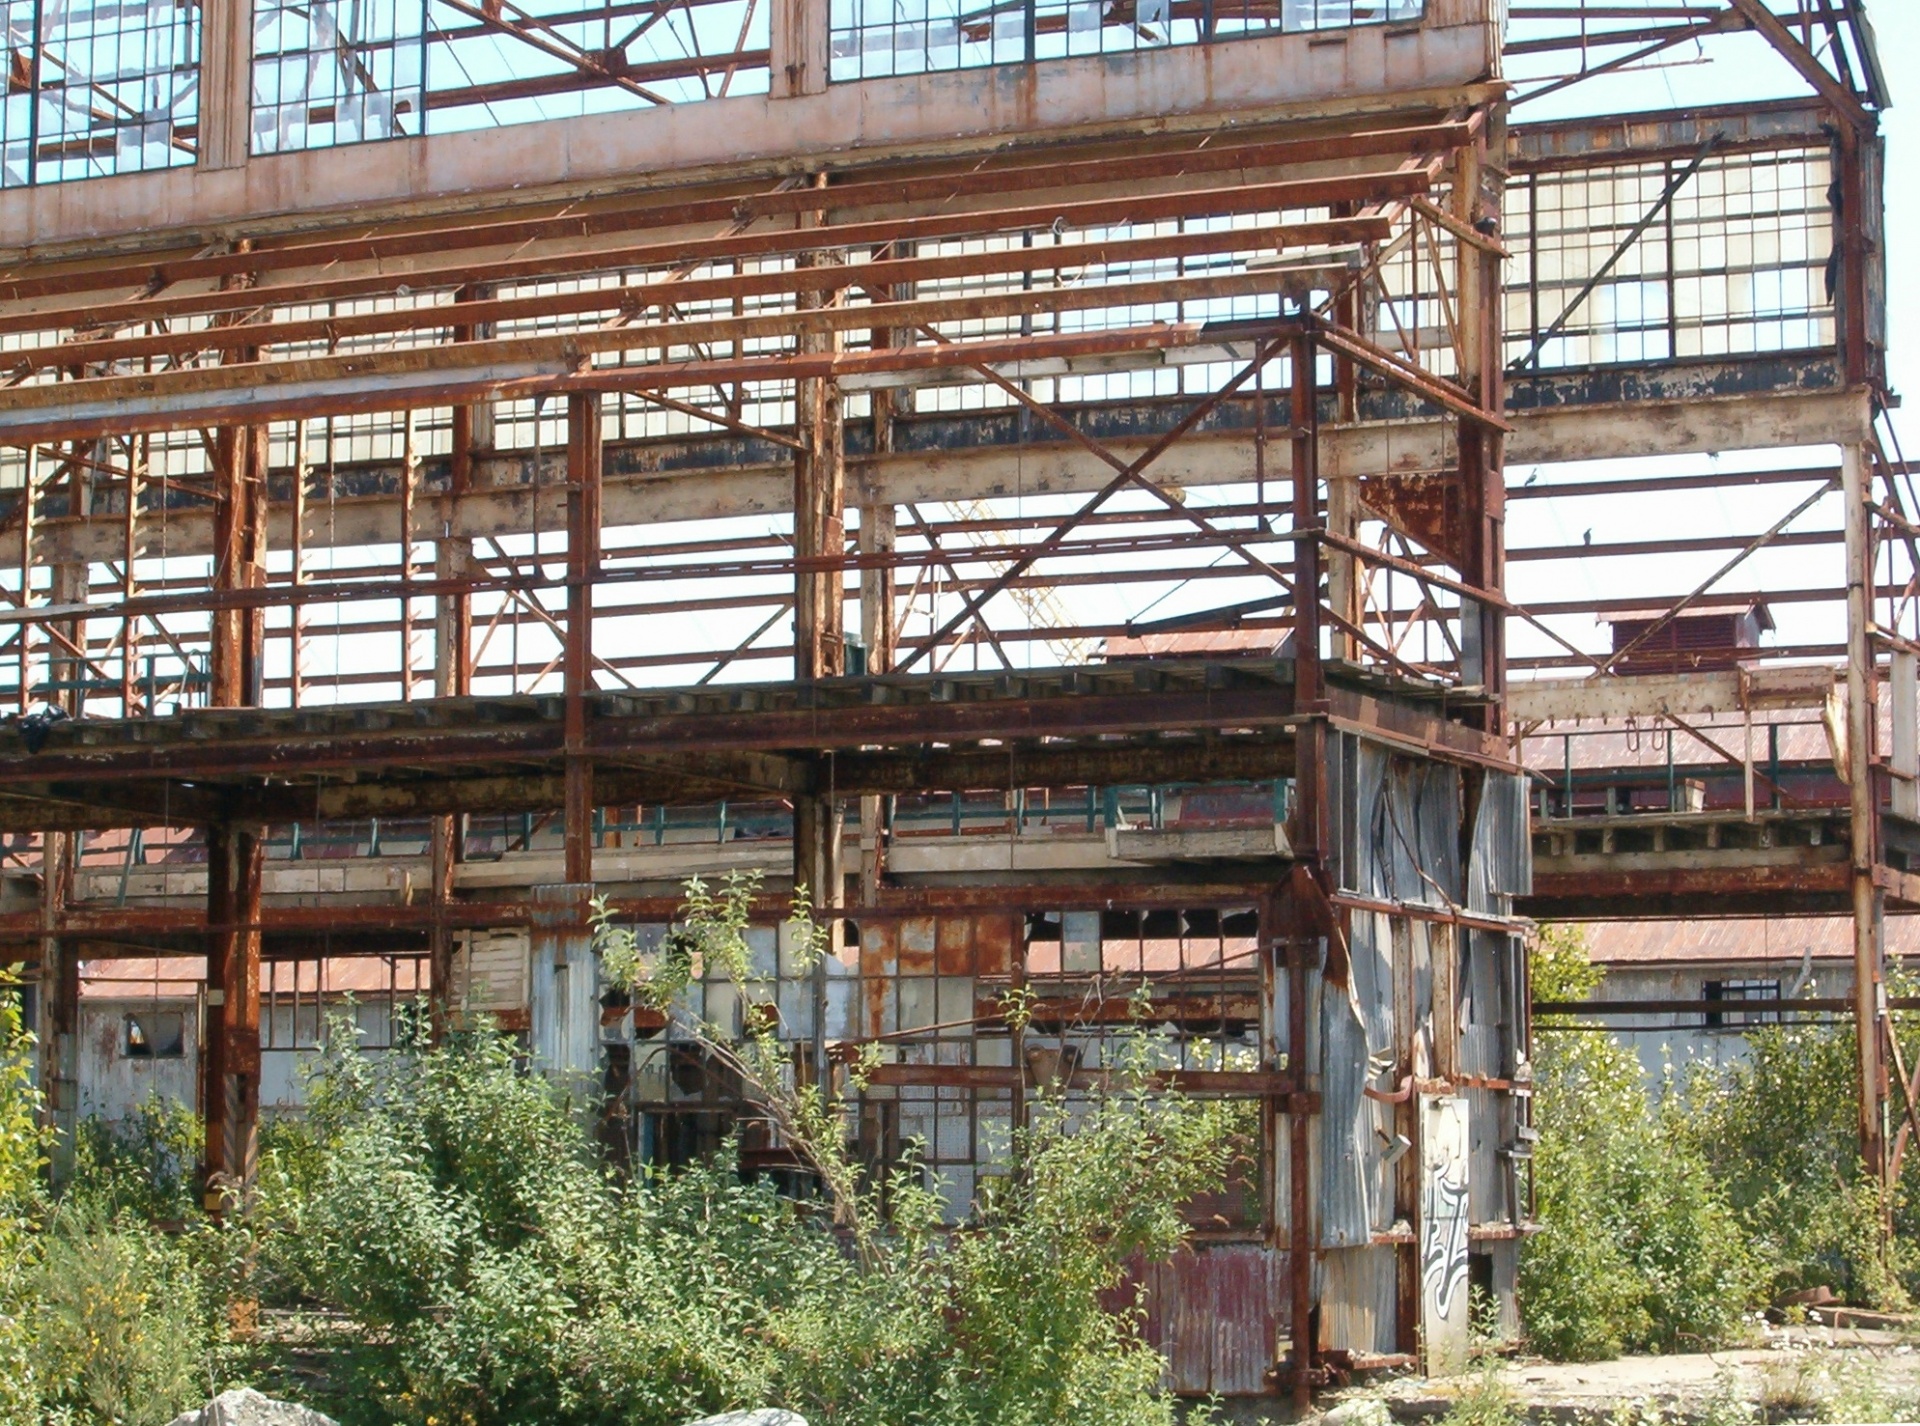 The skeleton frame of a derelict warehouse on the north shore of Vancouver on waterfront land undeveloped.